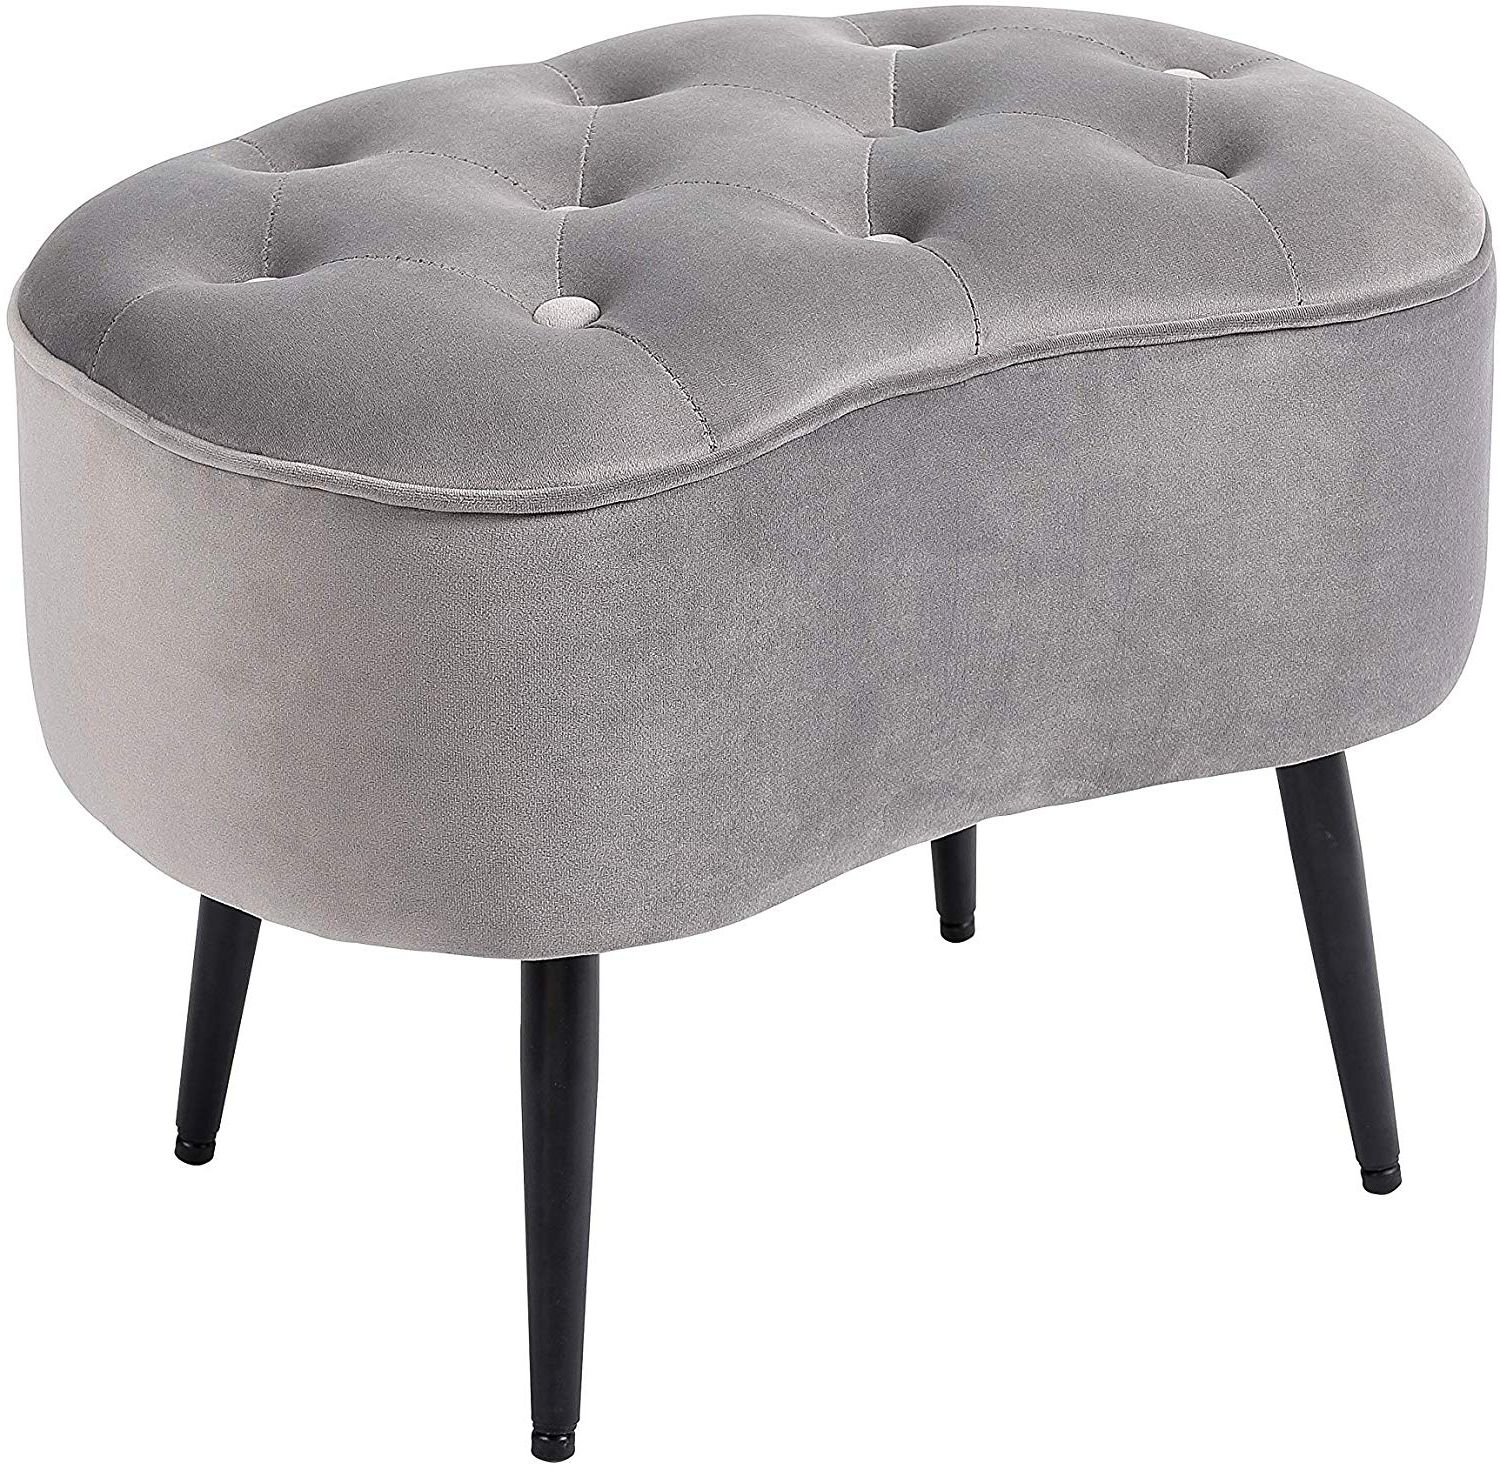 Well Known Ivory Button Tufted Vanity Stools In Birdrock Home Tufted Oblong Grey Ottoman – Velvet Foot Stool – Mid (View 5 of 10)